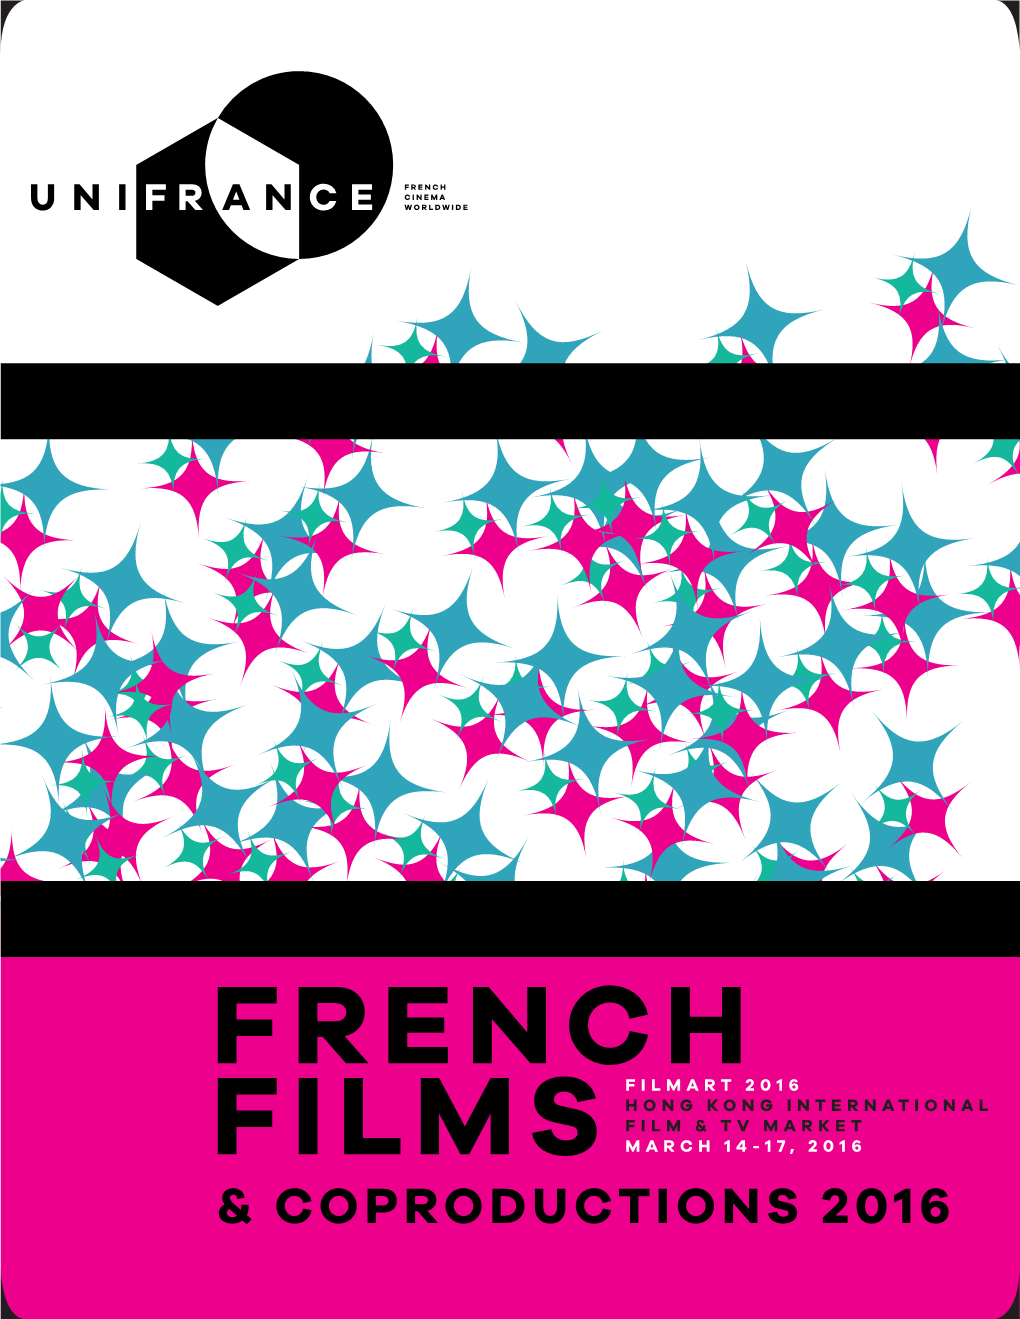 French Films in Brief